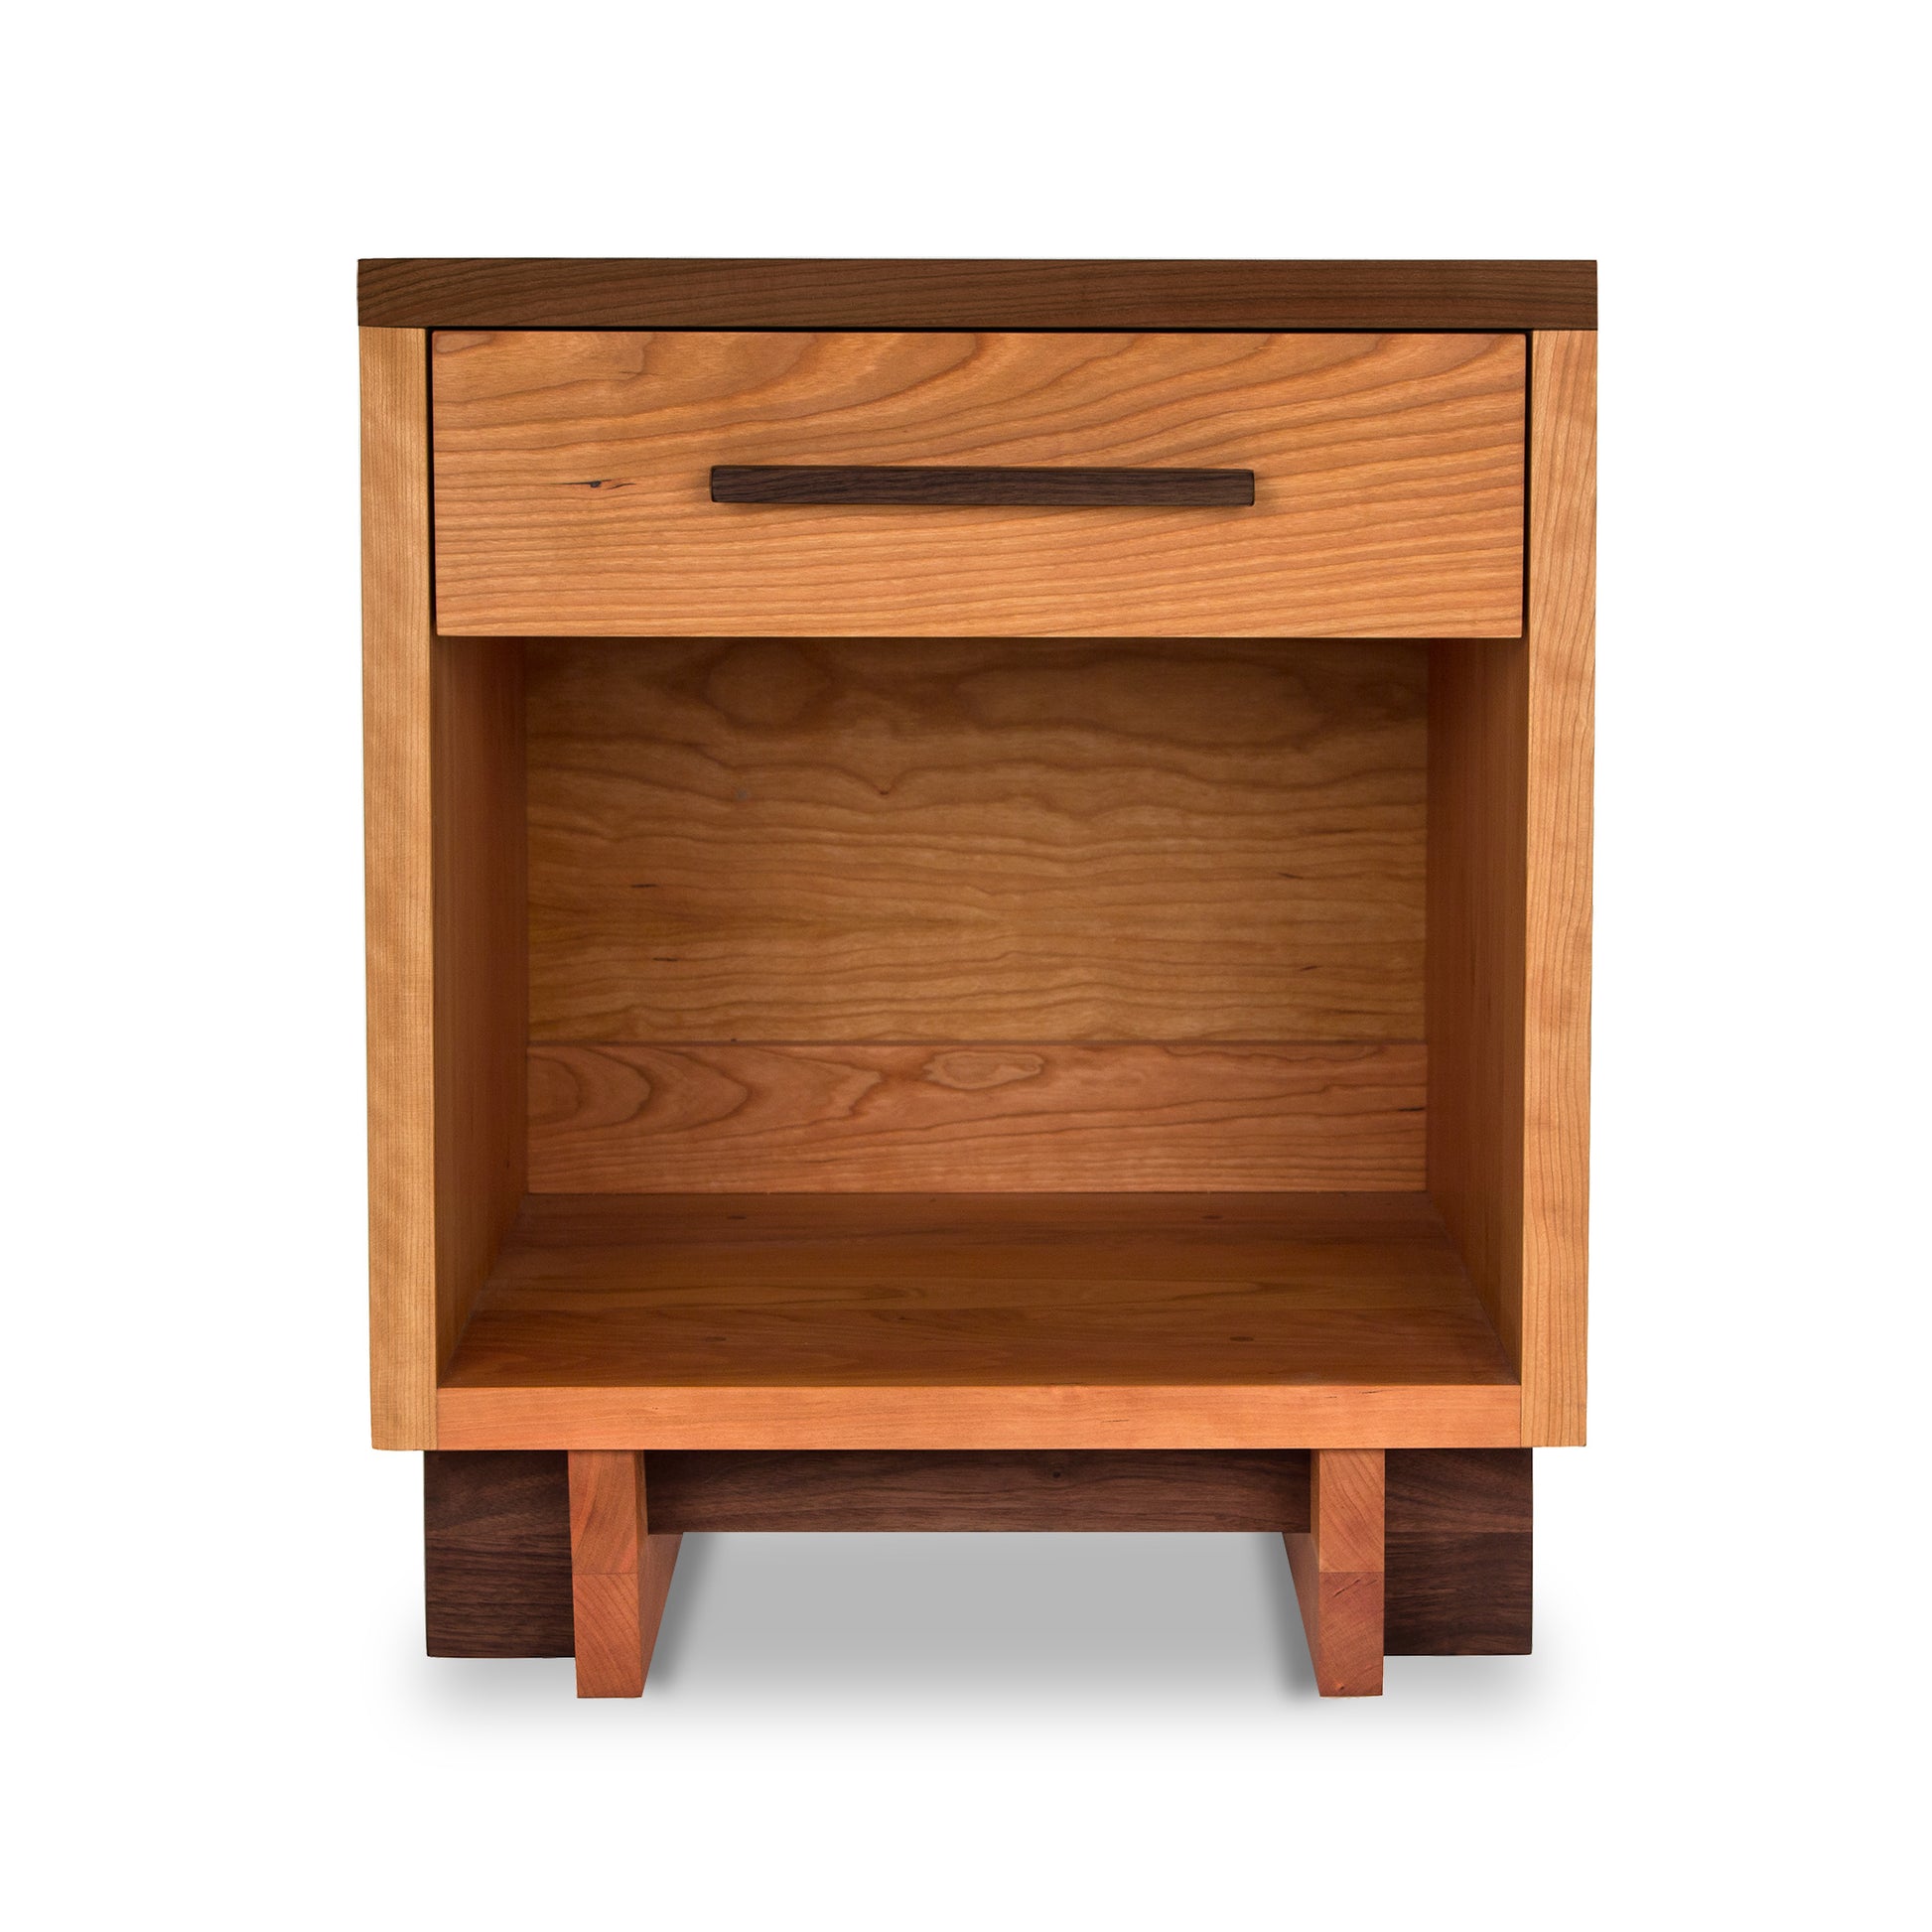 A Vermont Furniture Designs Modern American 1-Drawer Enclosed Shelf Nightstand made of solid wood, featuring a drawer on top.